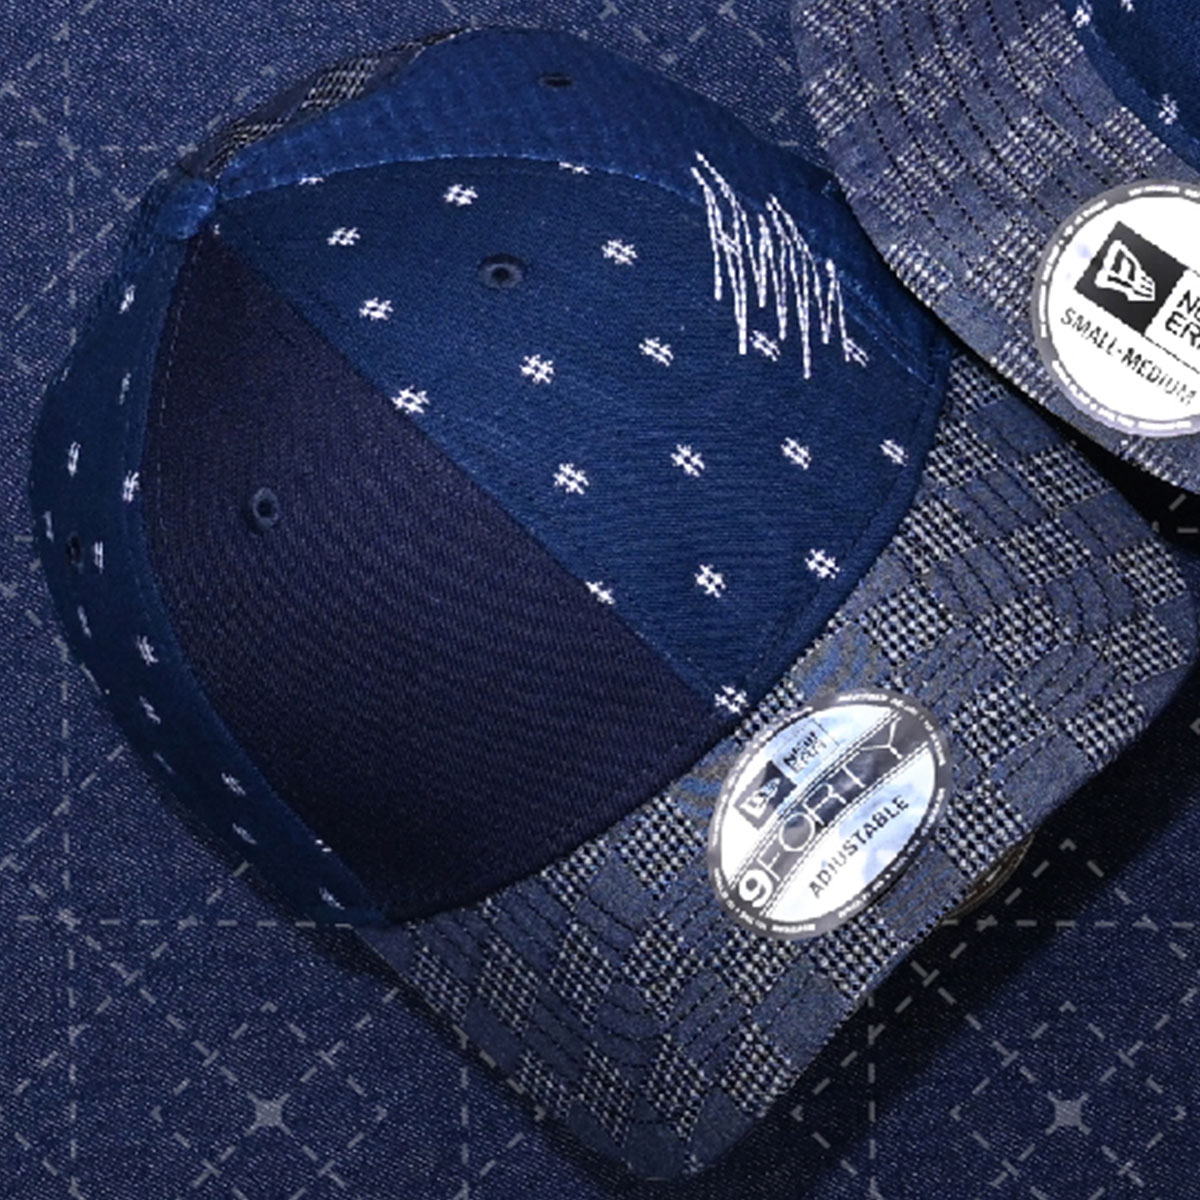 Japanese Styling En Vogue NEW ERA「BORO」Collection Plays with Retro ...